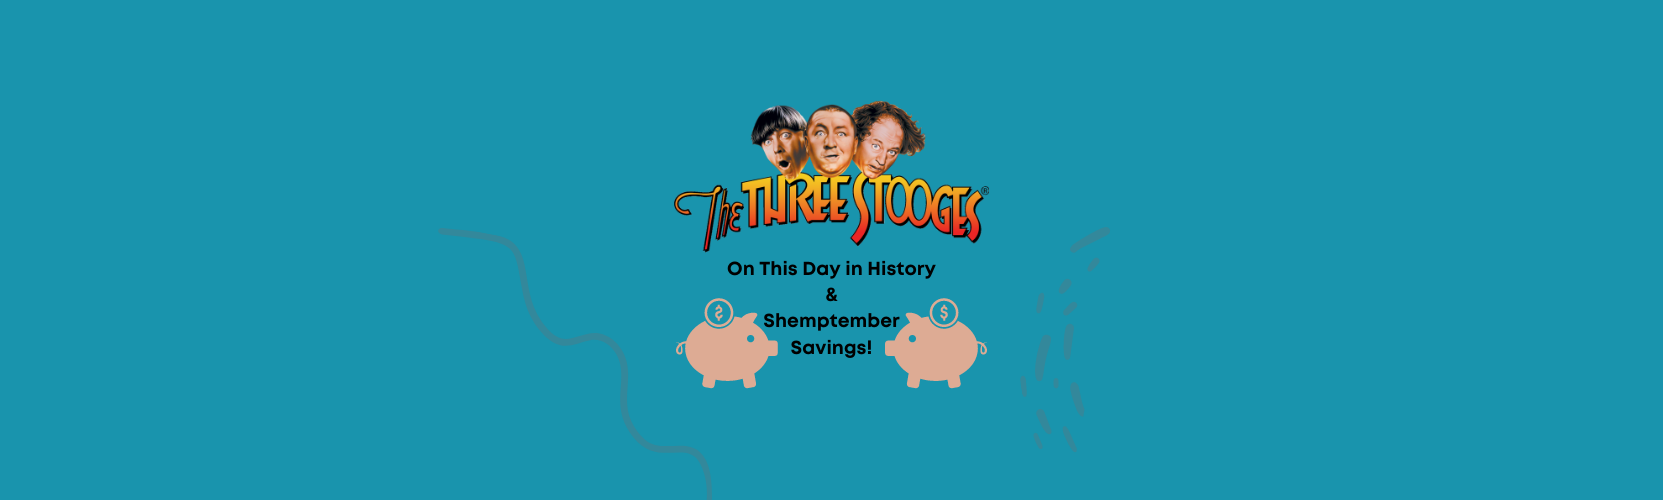 ShopKnuckleheads: On This Day in History & Shemptember Savings!